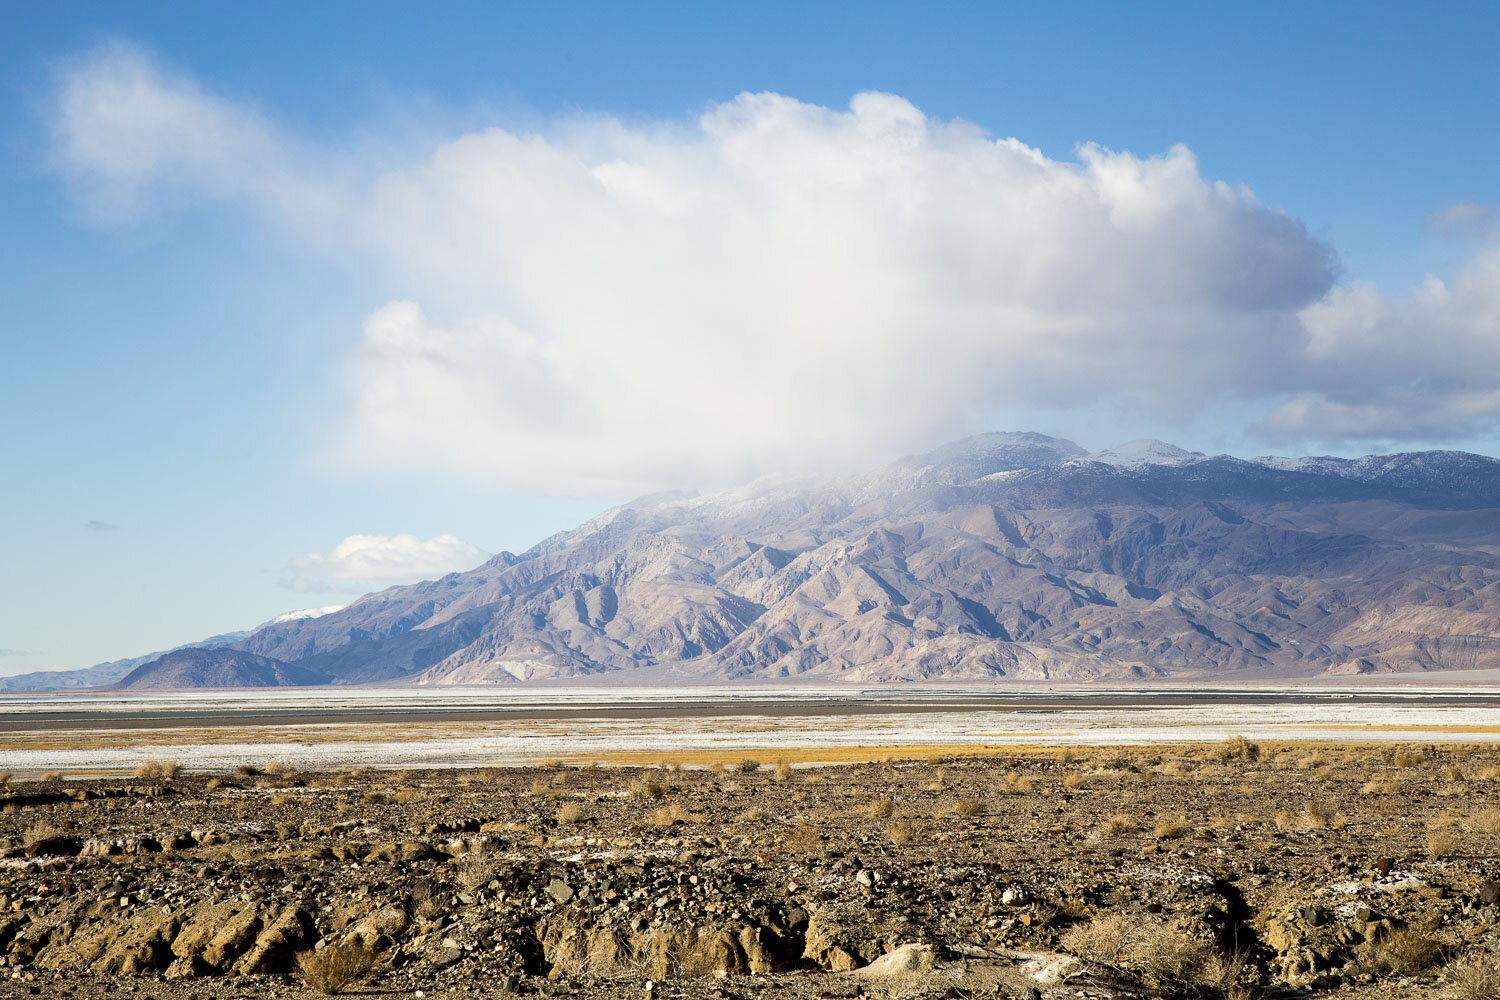 snow_storm_over_mountains_death_valley.jpg